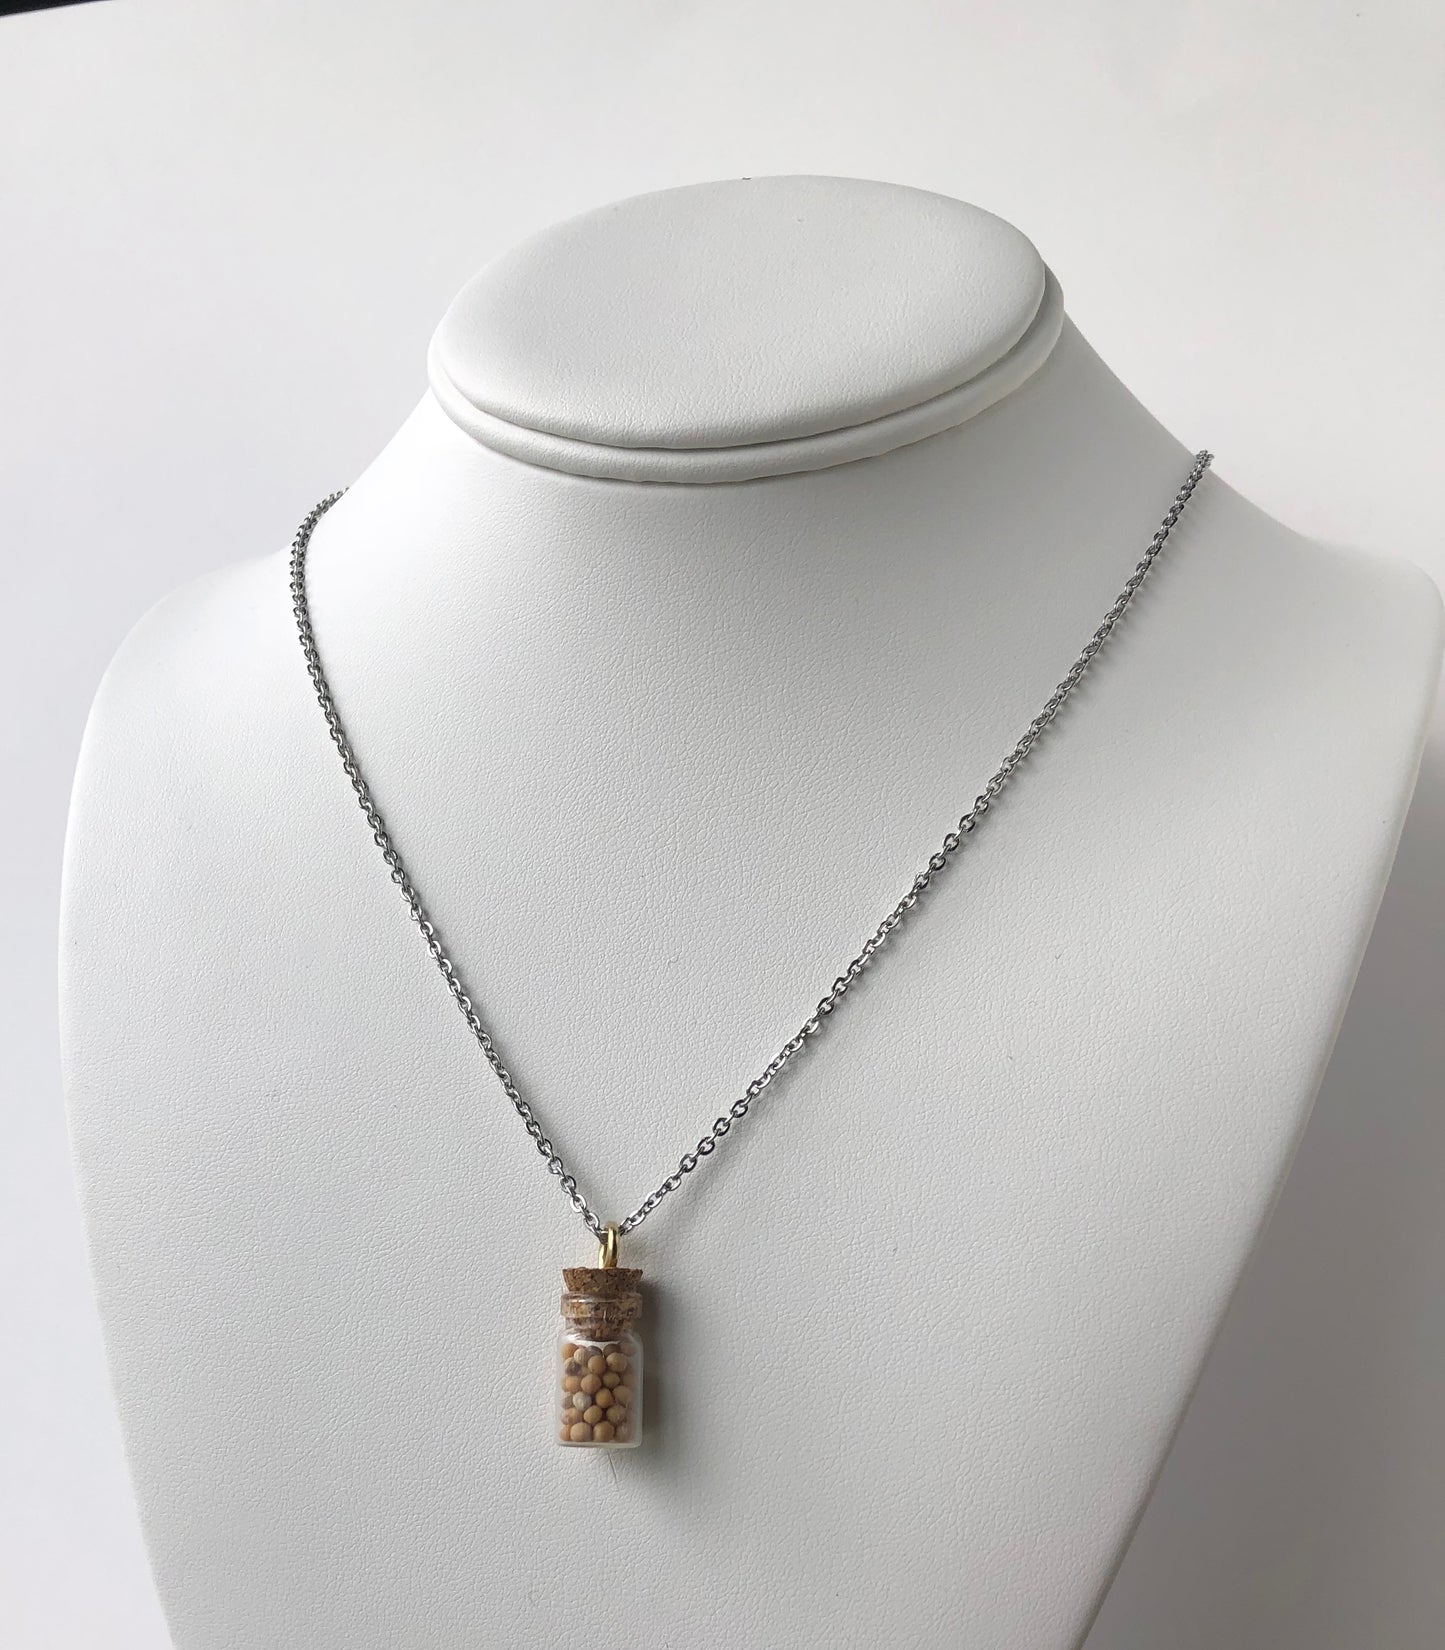 Faith Necklace - Mustard Seed Necklace